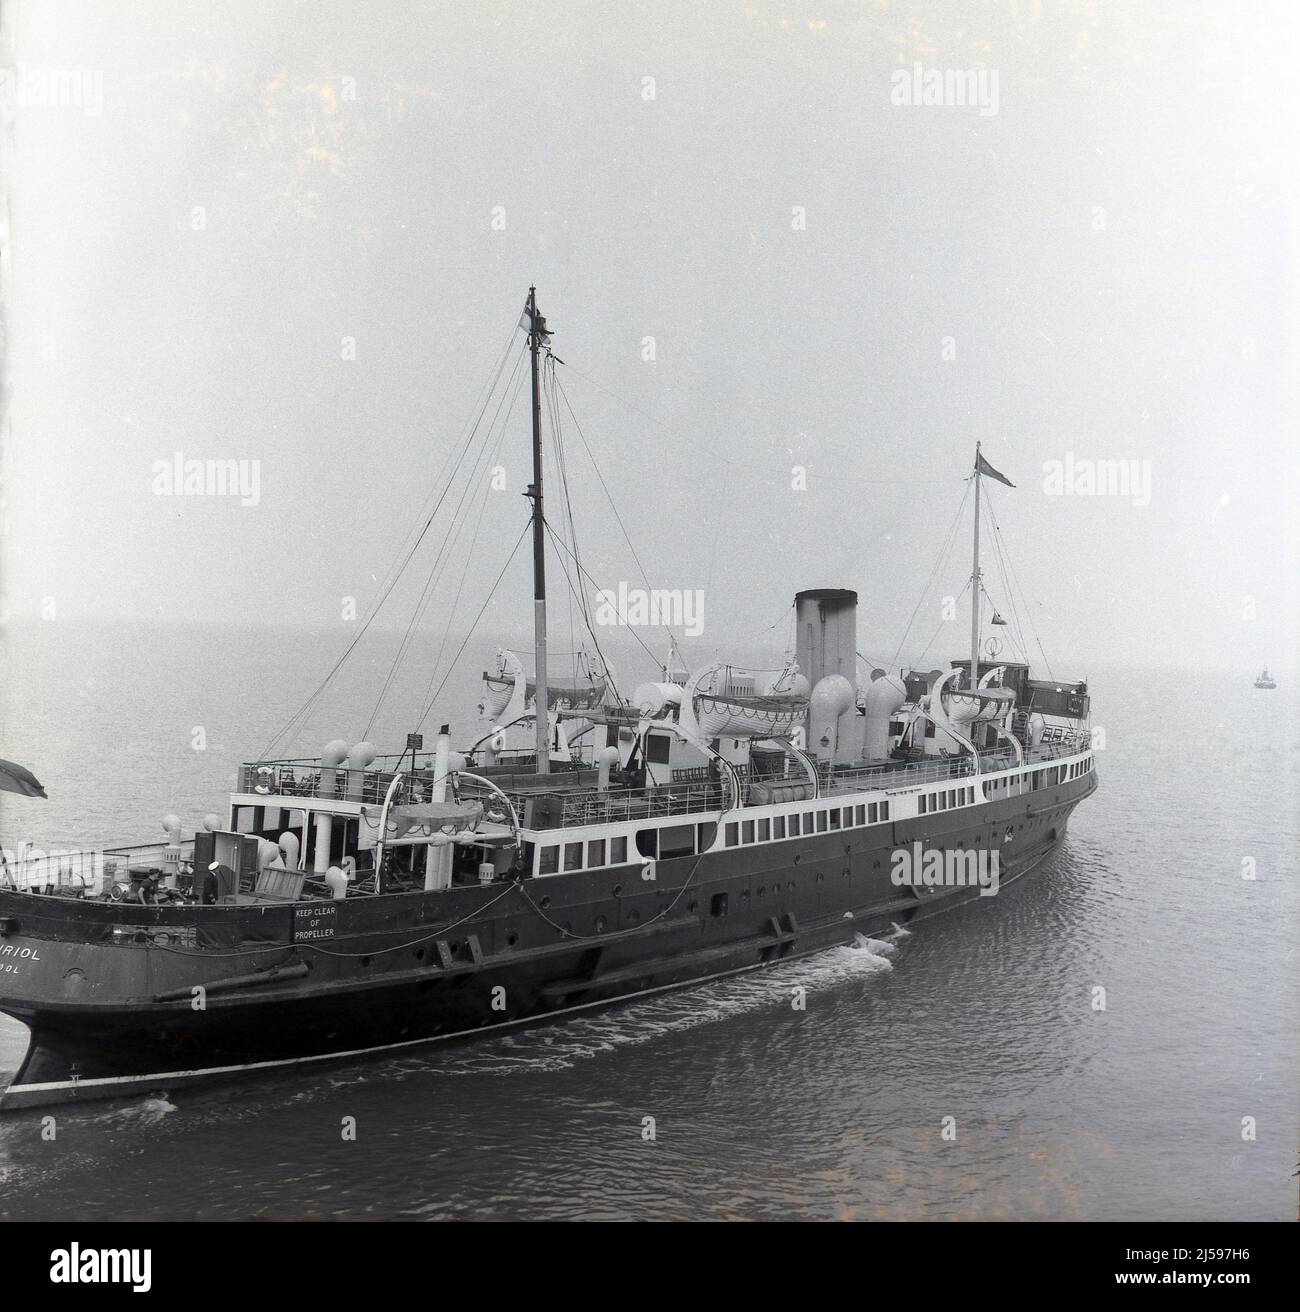 1959, historical, the steam passenger vessel 'St Seiriol', of the Liverpool and North Wales Steamship company leaving the harbour, Rhyl, Wales, UK. Sign on side of ship, says, 'KEEP CLEAR OF PROPELLER'. The ship entered service in 1935 and operated until 1962. Stock Photo